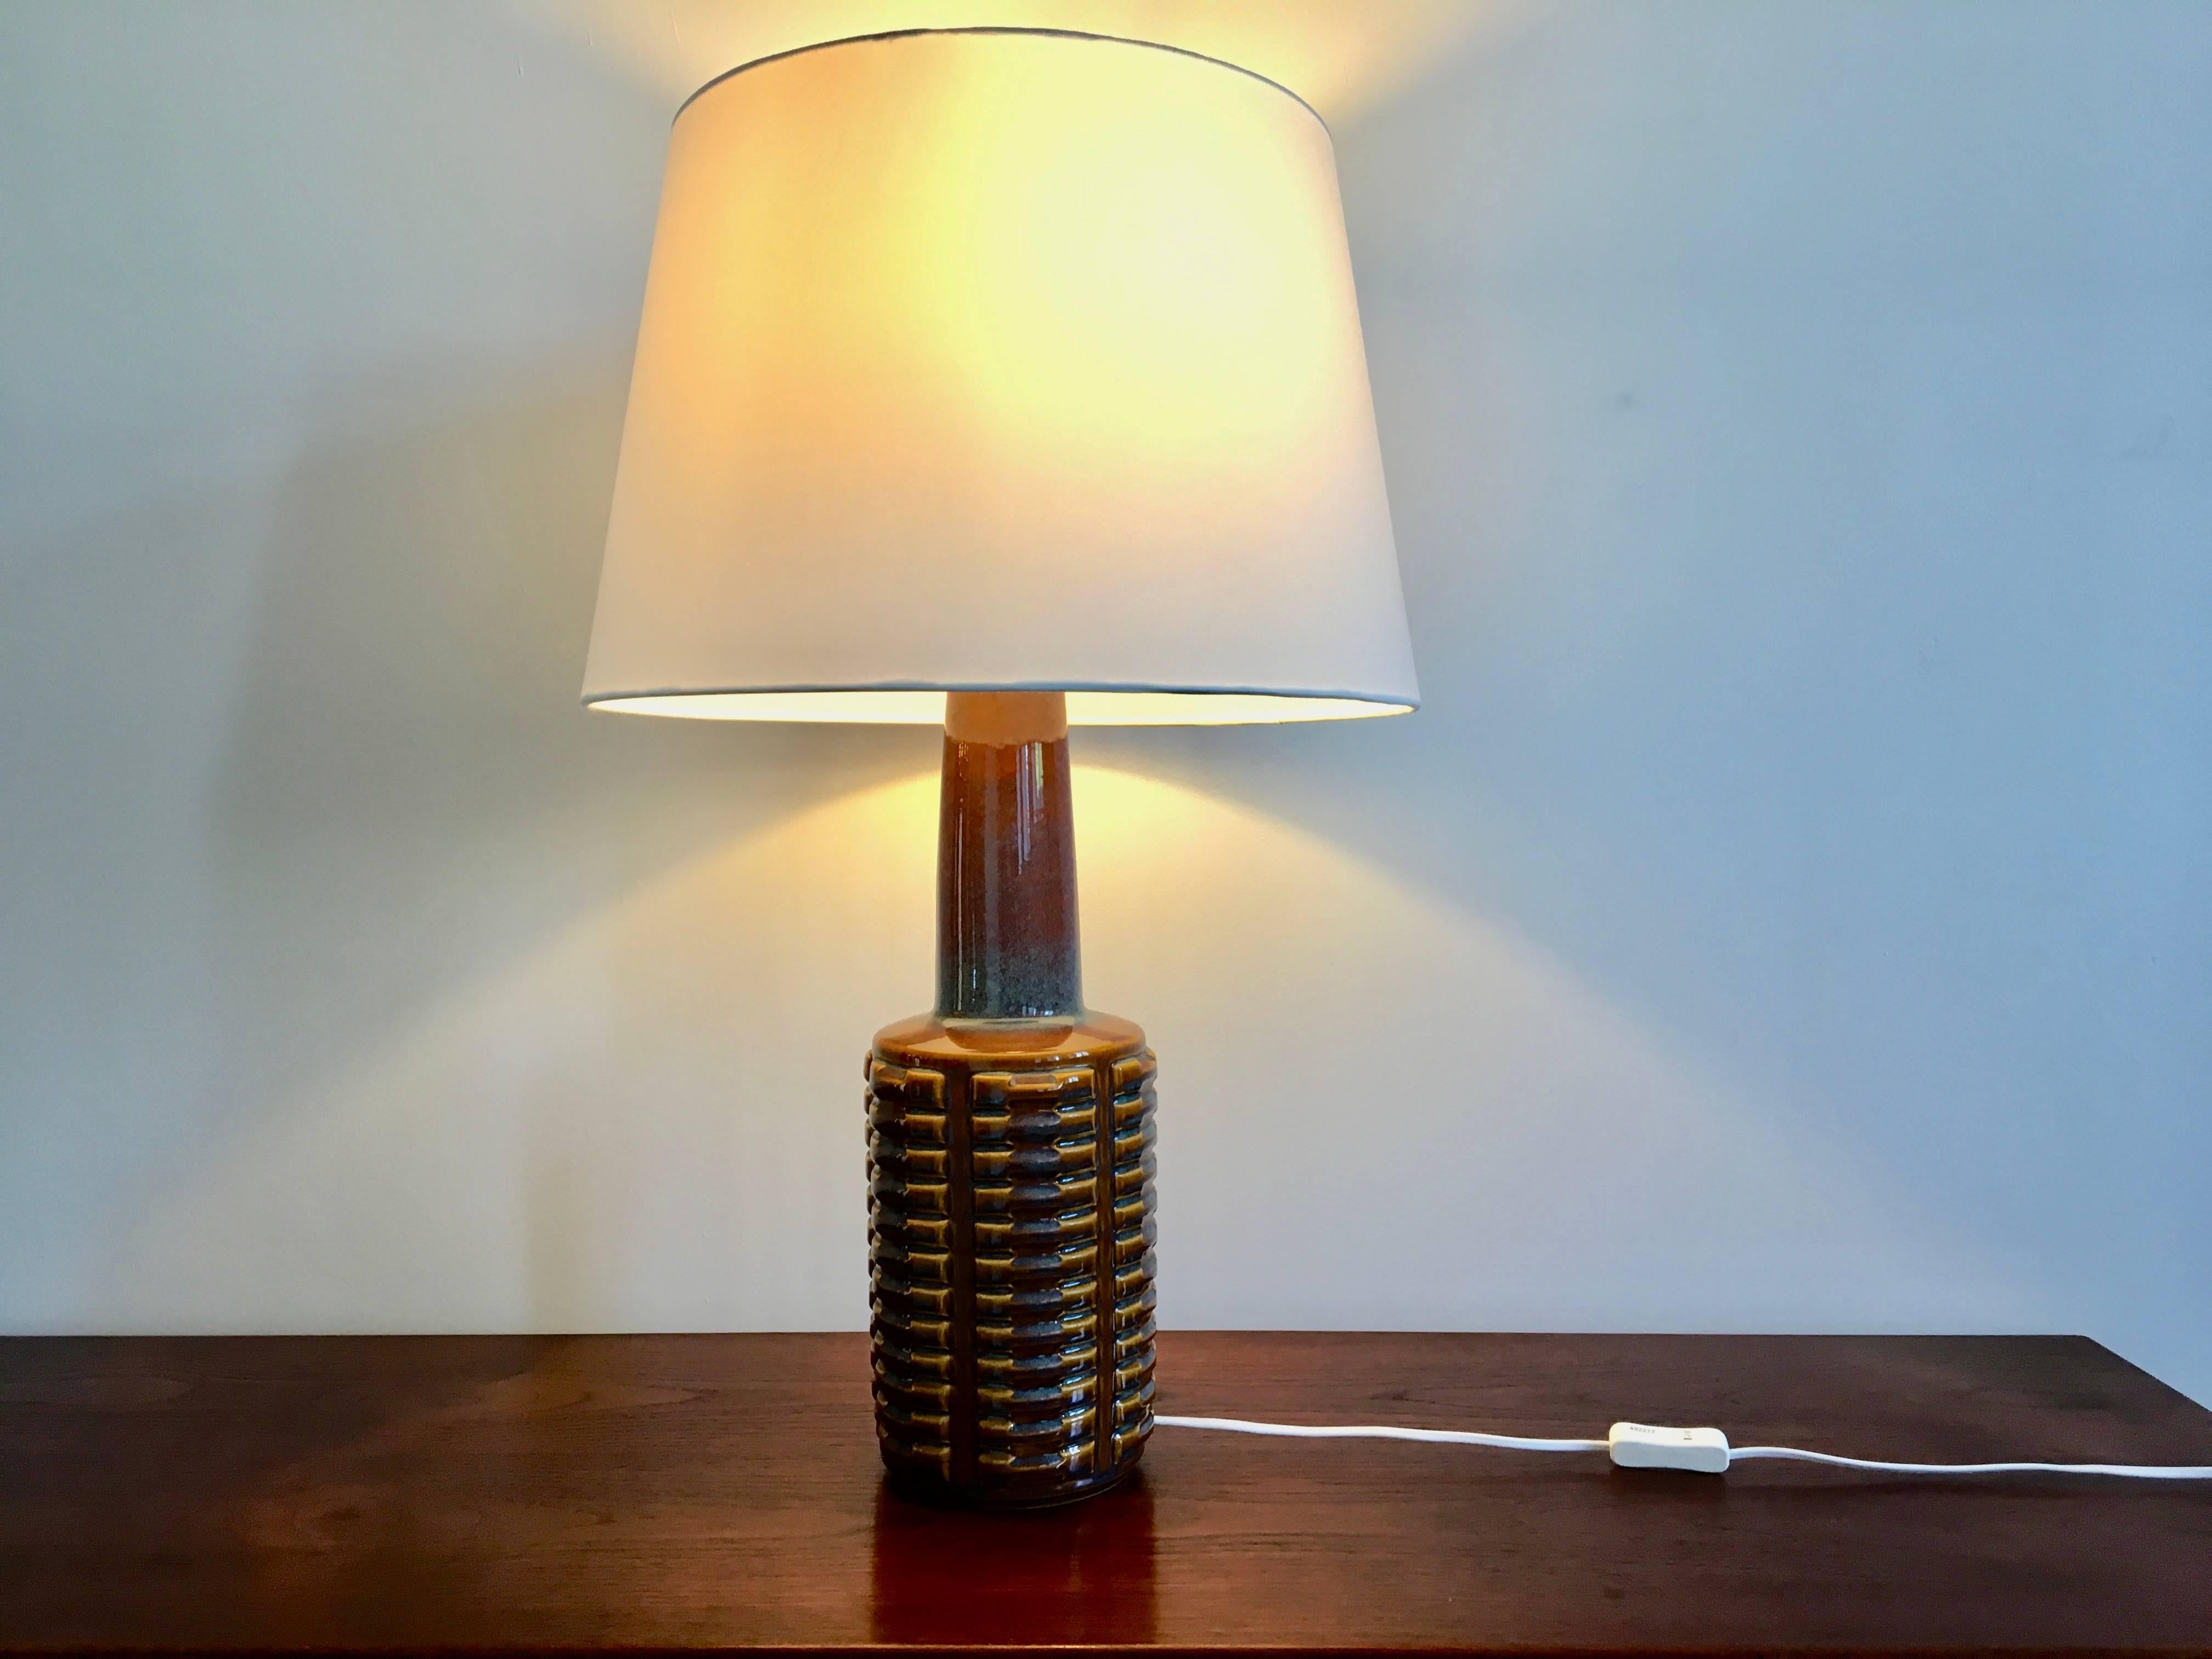 This ceramic table lamp was designed by Einar Johansen and produced by Soholm Stentoj in Denmark in the 1960s. The lamp has been rewired with switch and a European plug.